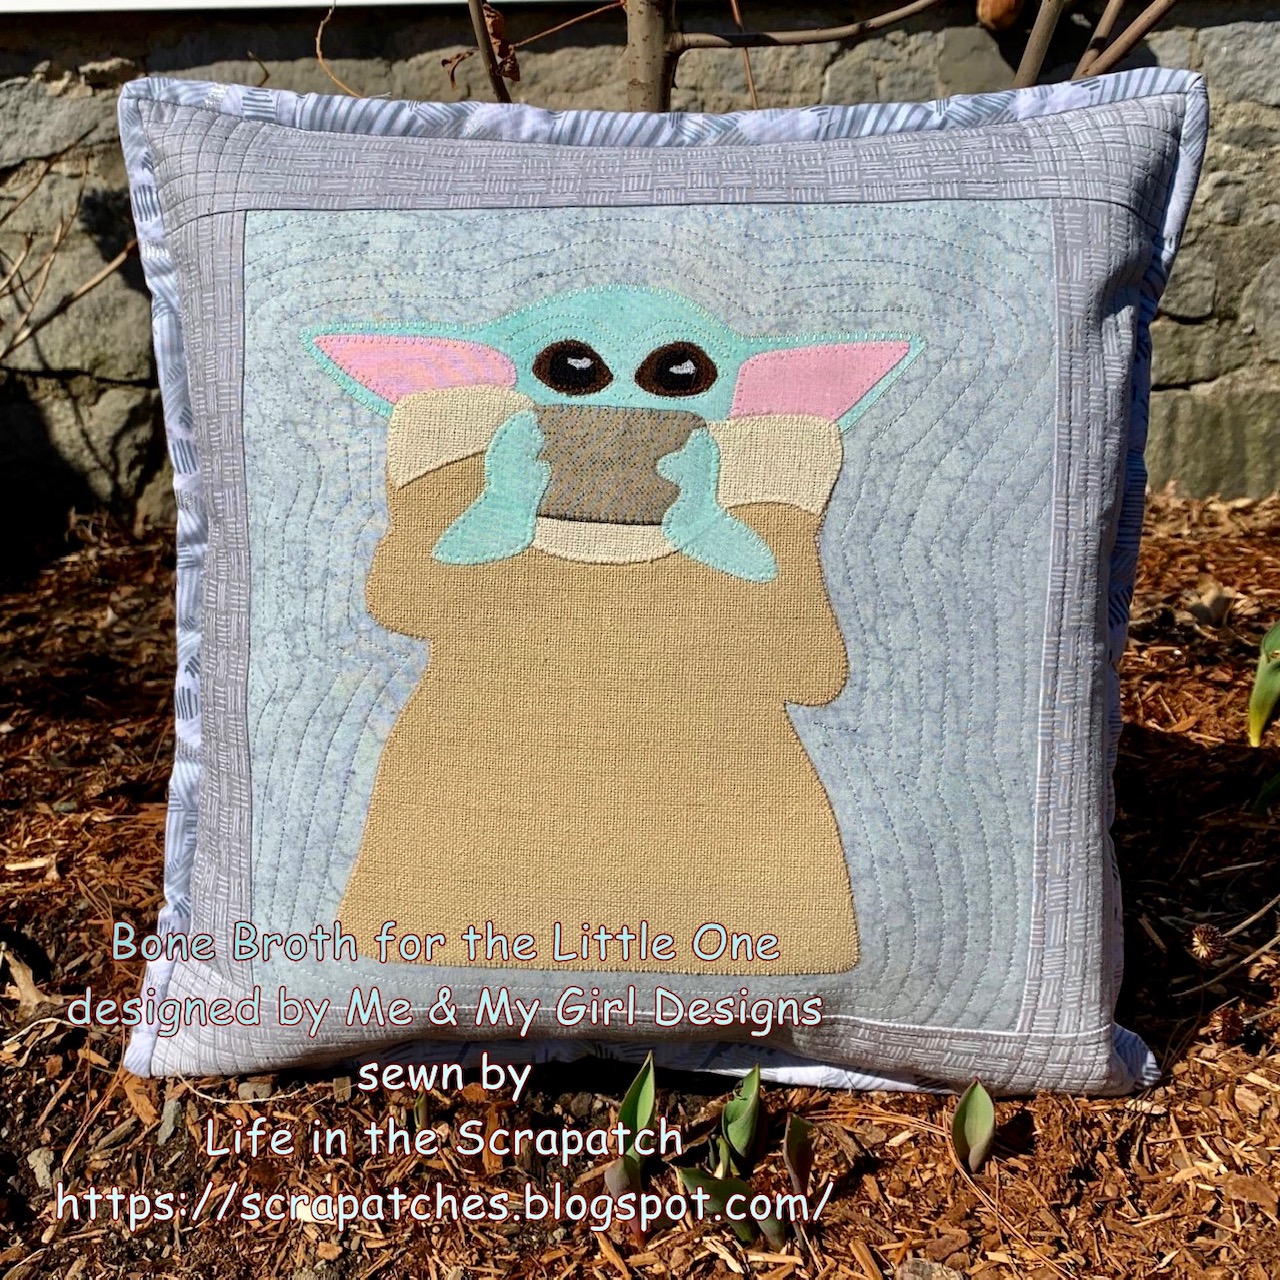 A Good Night to Stay In and Stitch - Life in the Scrapatch